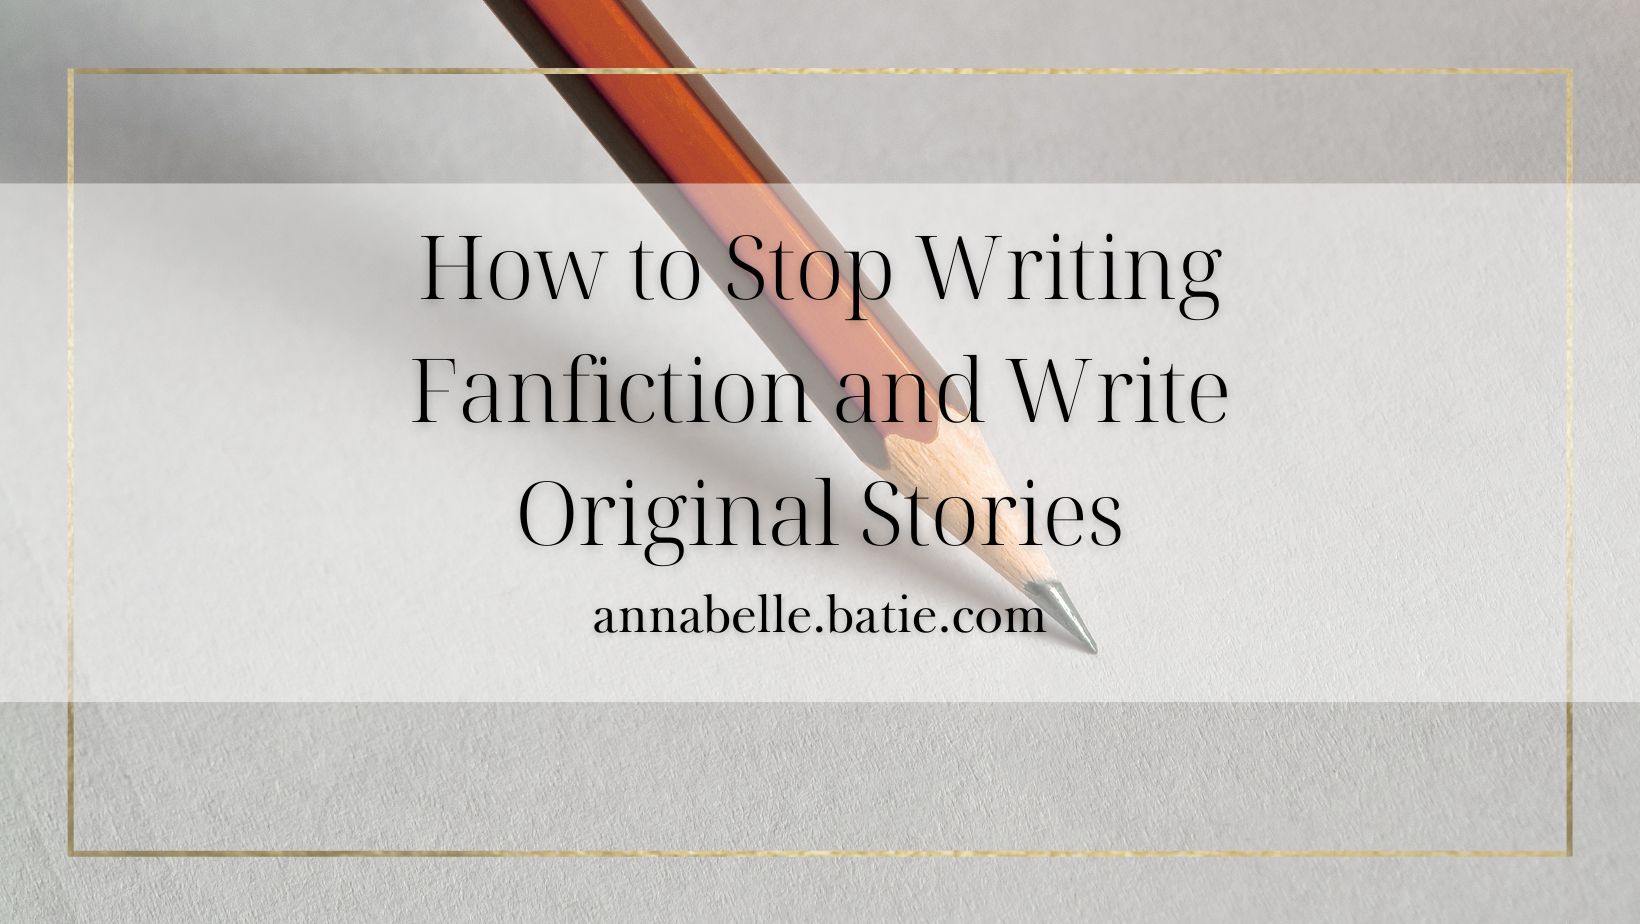 How to Stop Writing Fanfiction and Write Original Stories